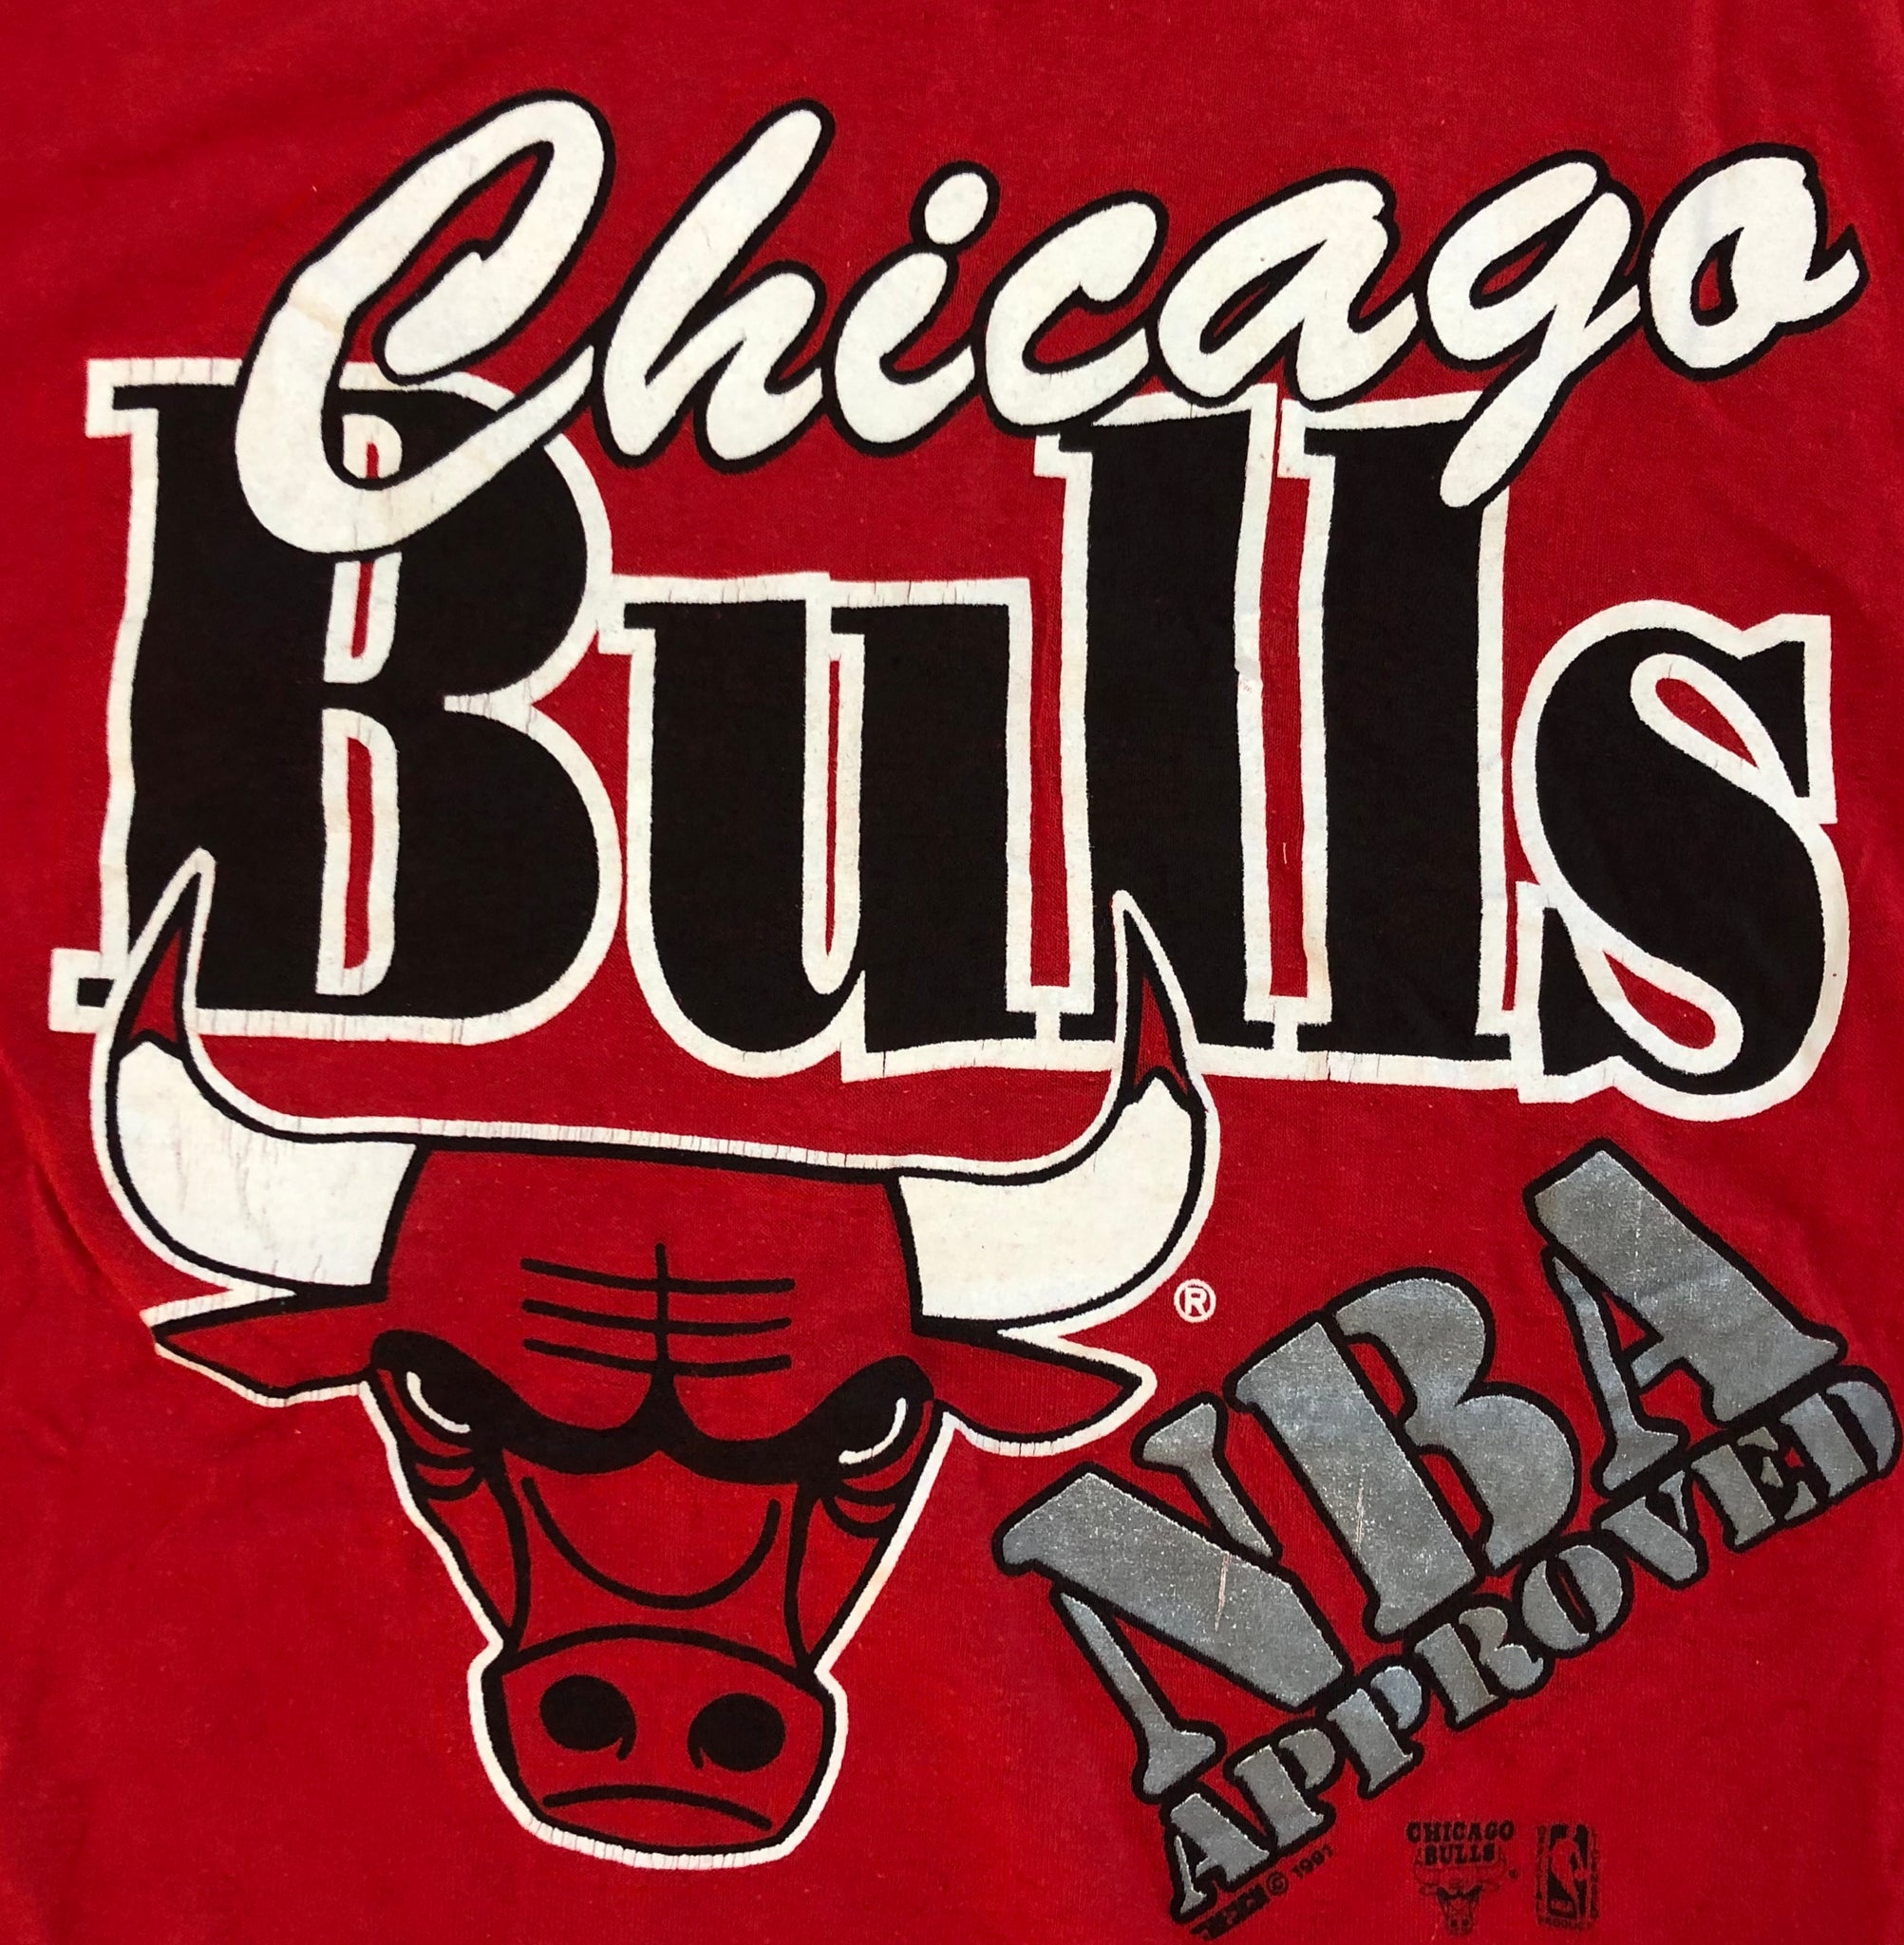 Nba Exclusive Adult Large Got Rings Shirt Chicsgo Bulls Red